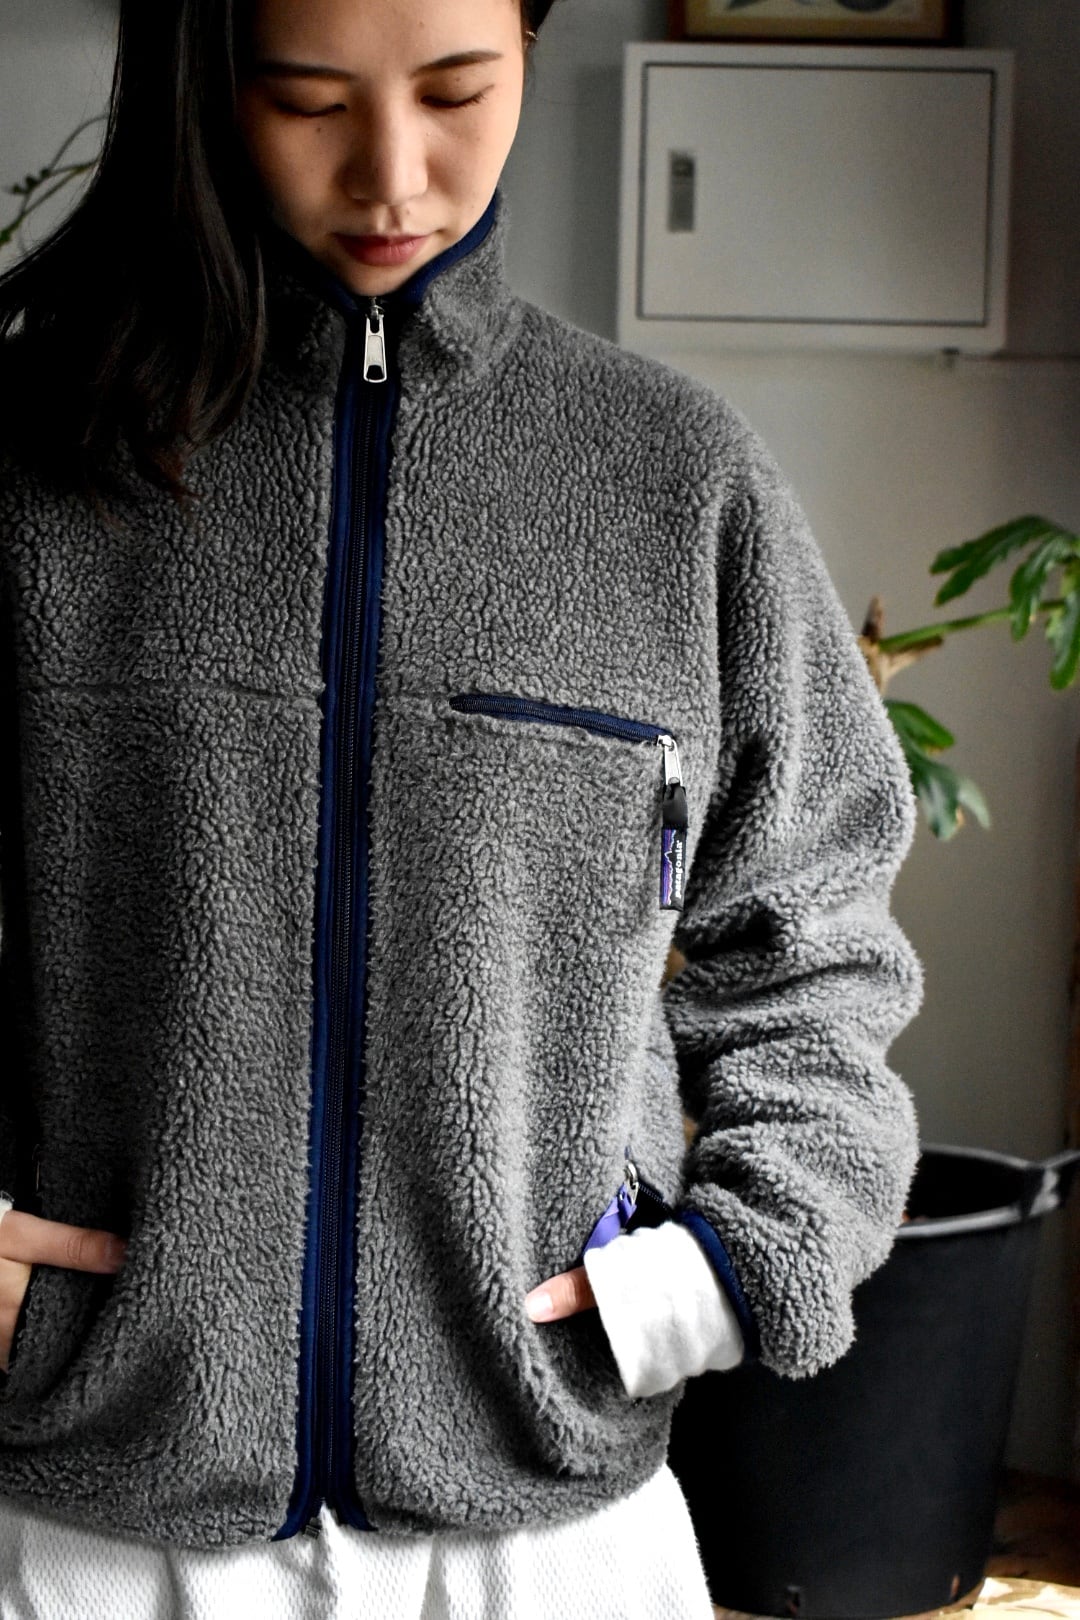 90's “old patagonia“ baby retro cardigan “gray“ size S | KEY WEB STORE